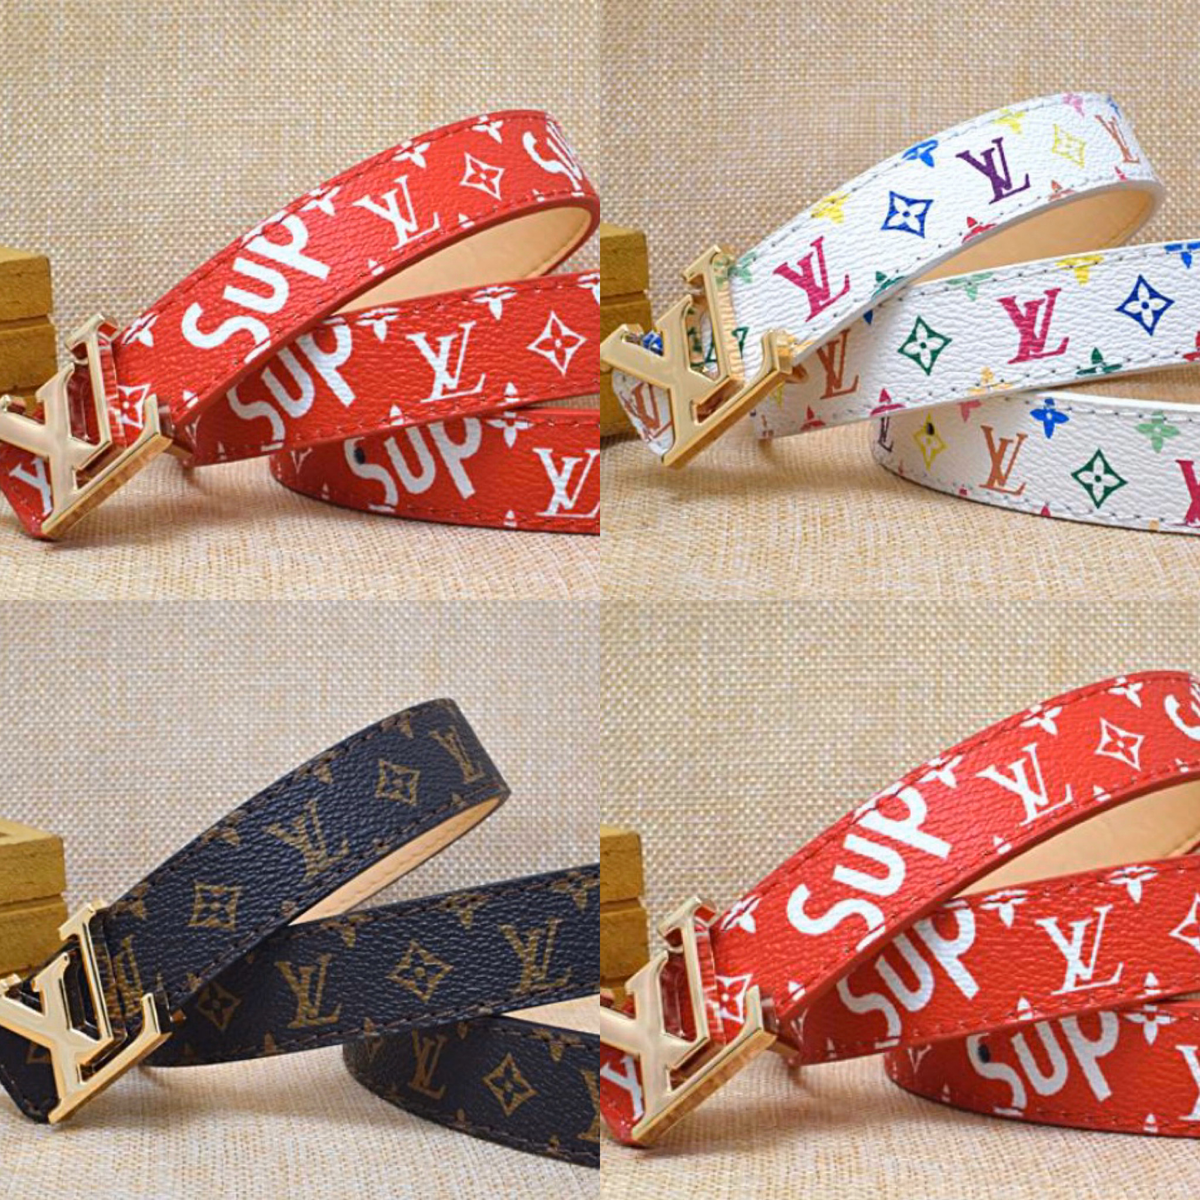 real belt lv louis vuitton for boys